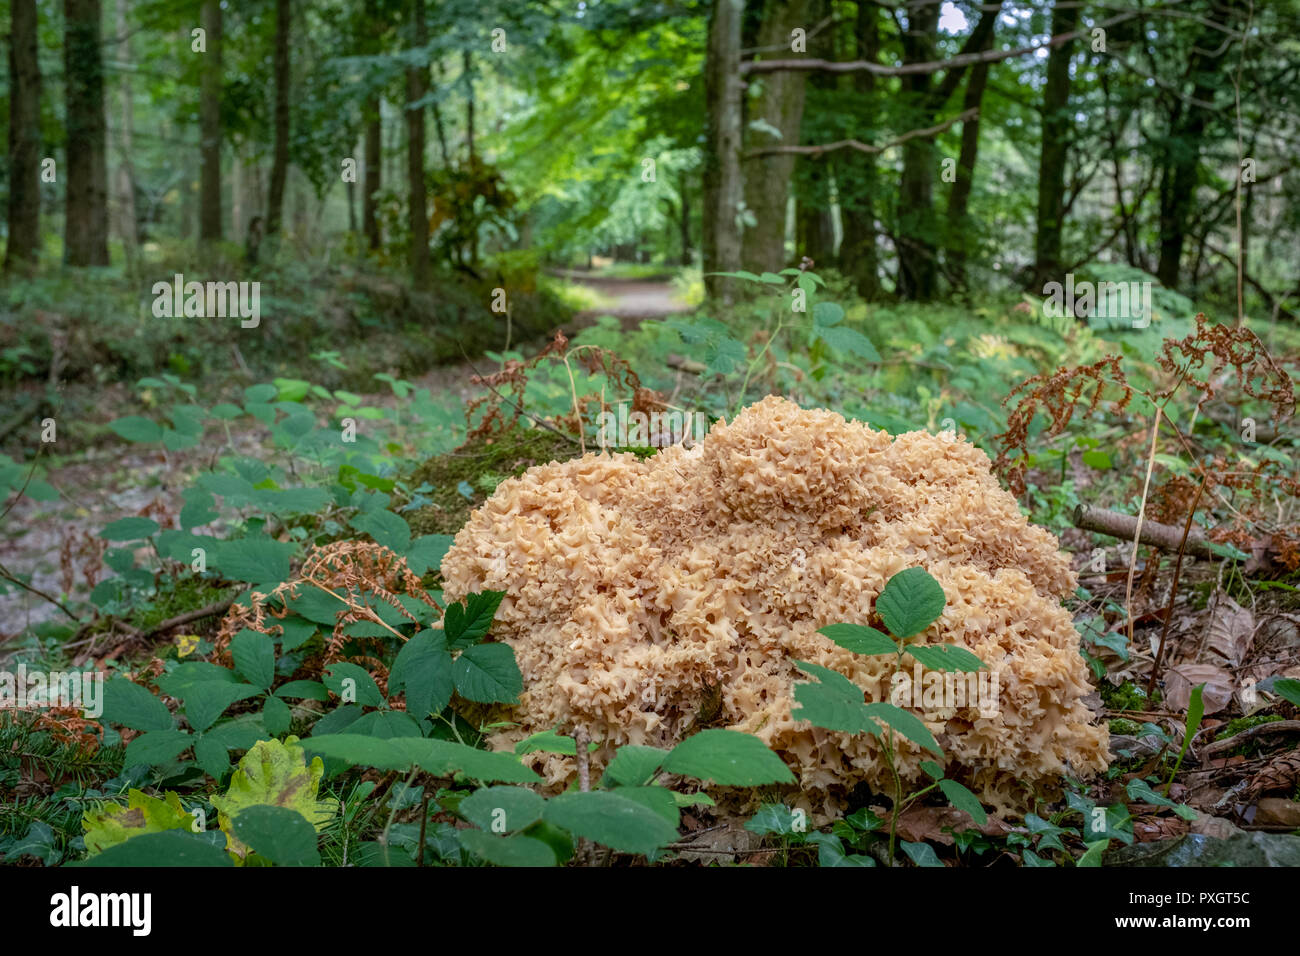 Cauliflower fungus, Sparassis crispa, growing in woodland in South Wales, UK. Stock Photo